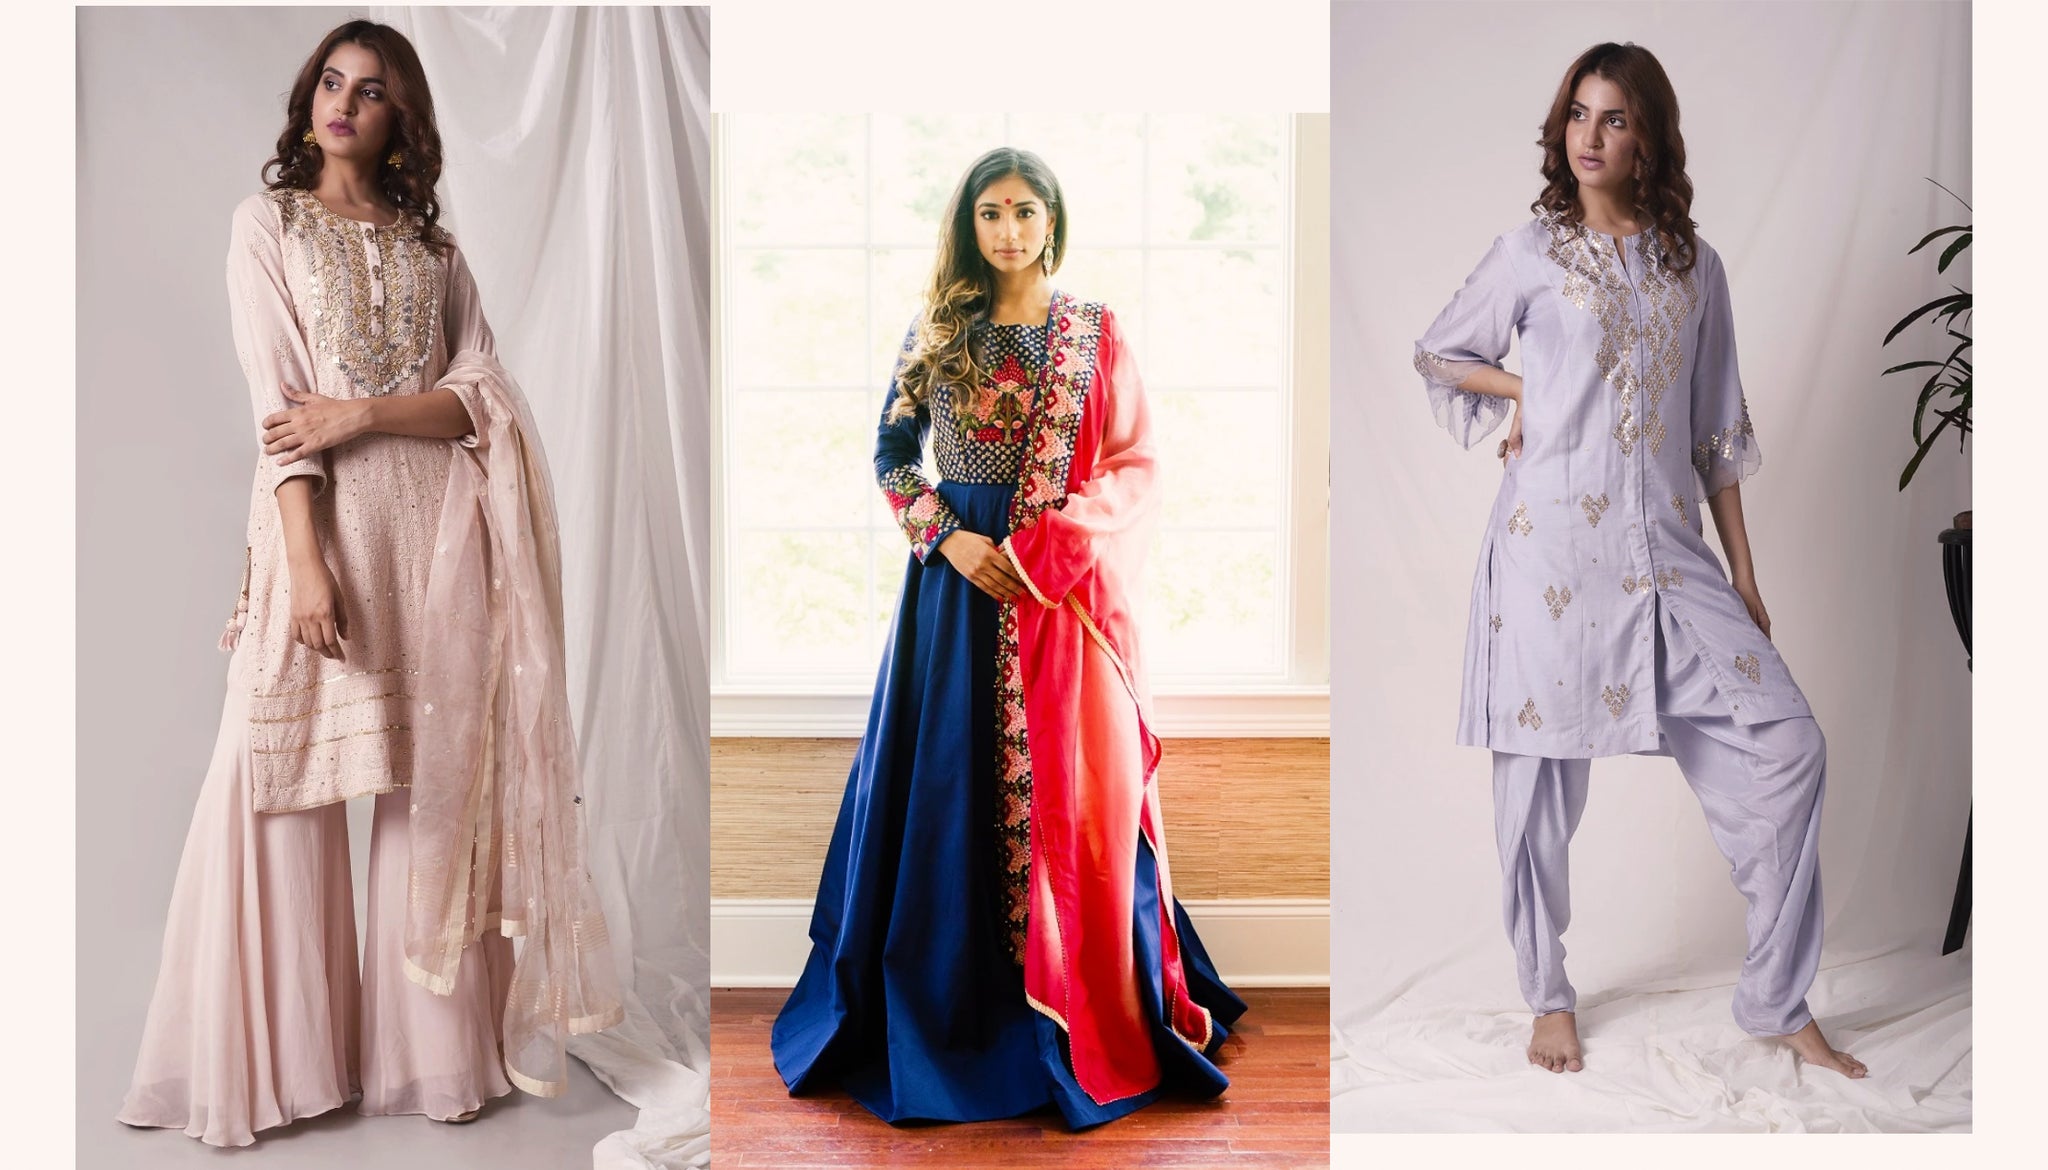 Five styles of Contemporary Salwar Kameez for 2020: The history reloaded.